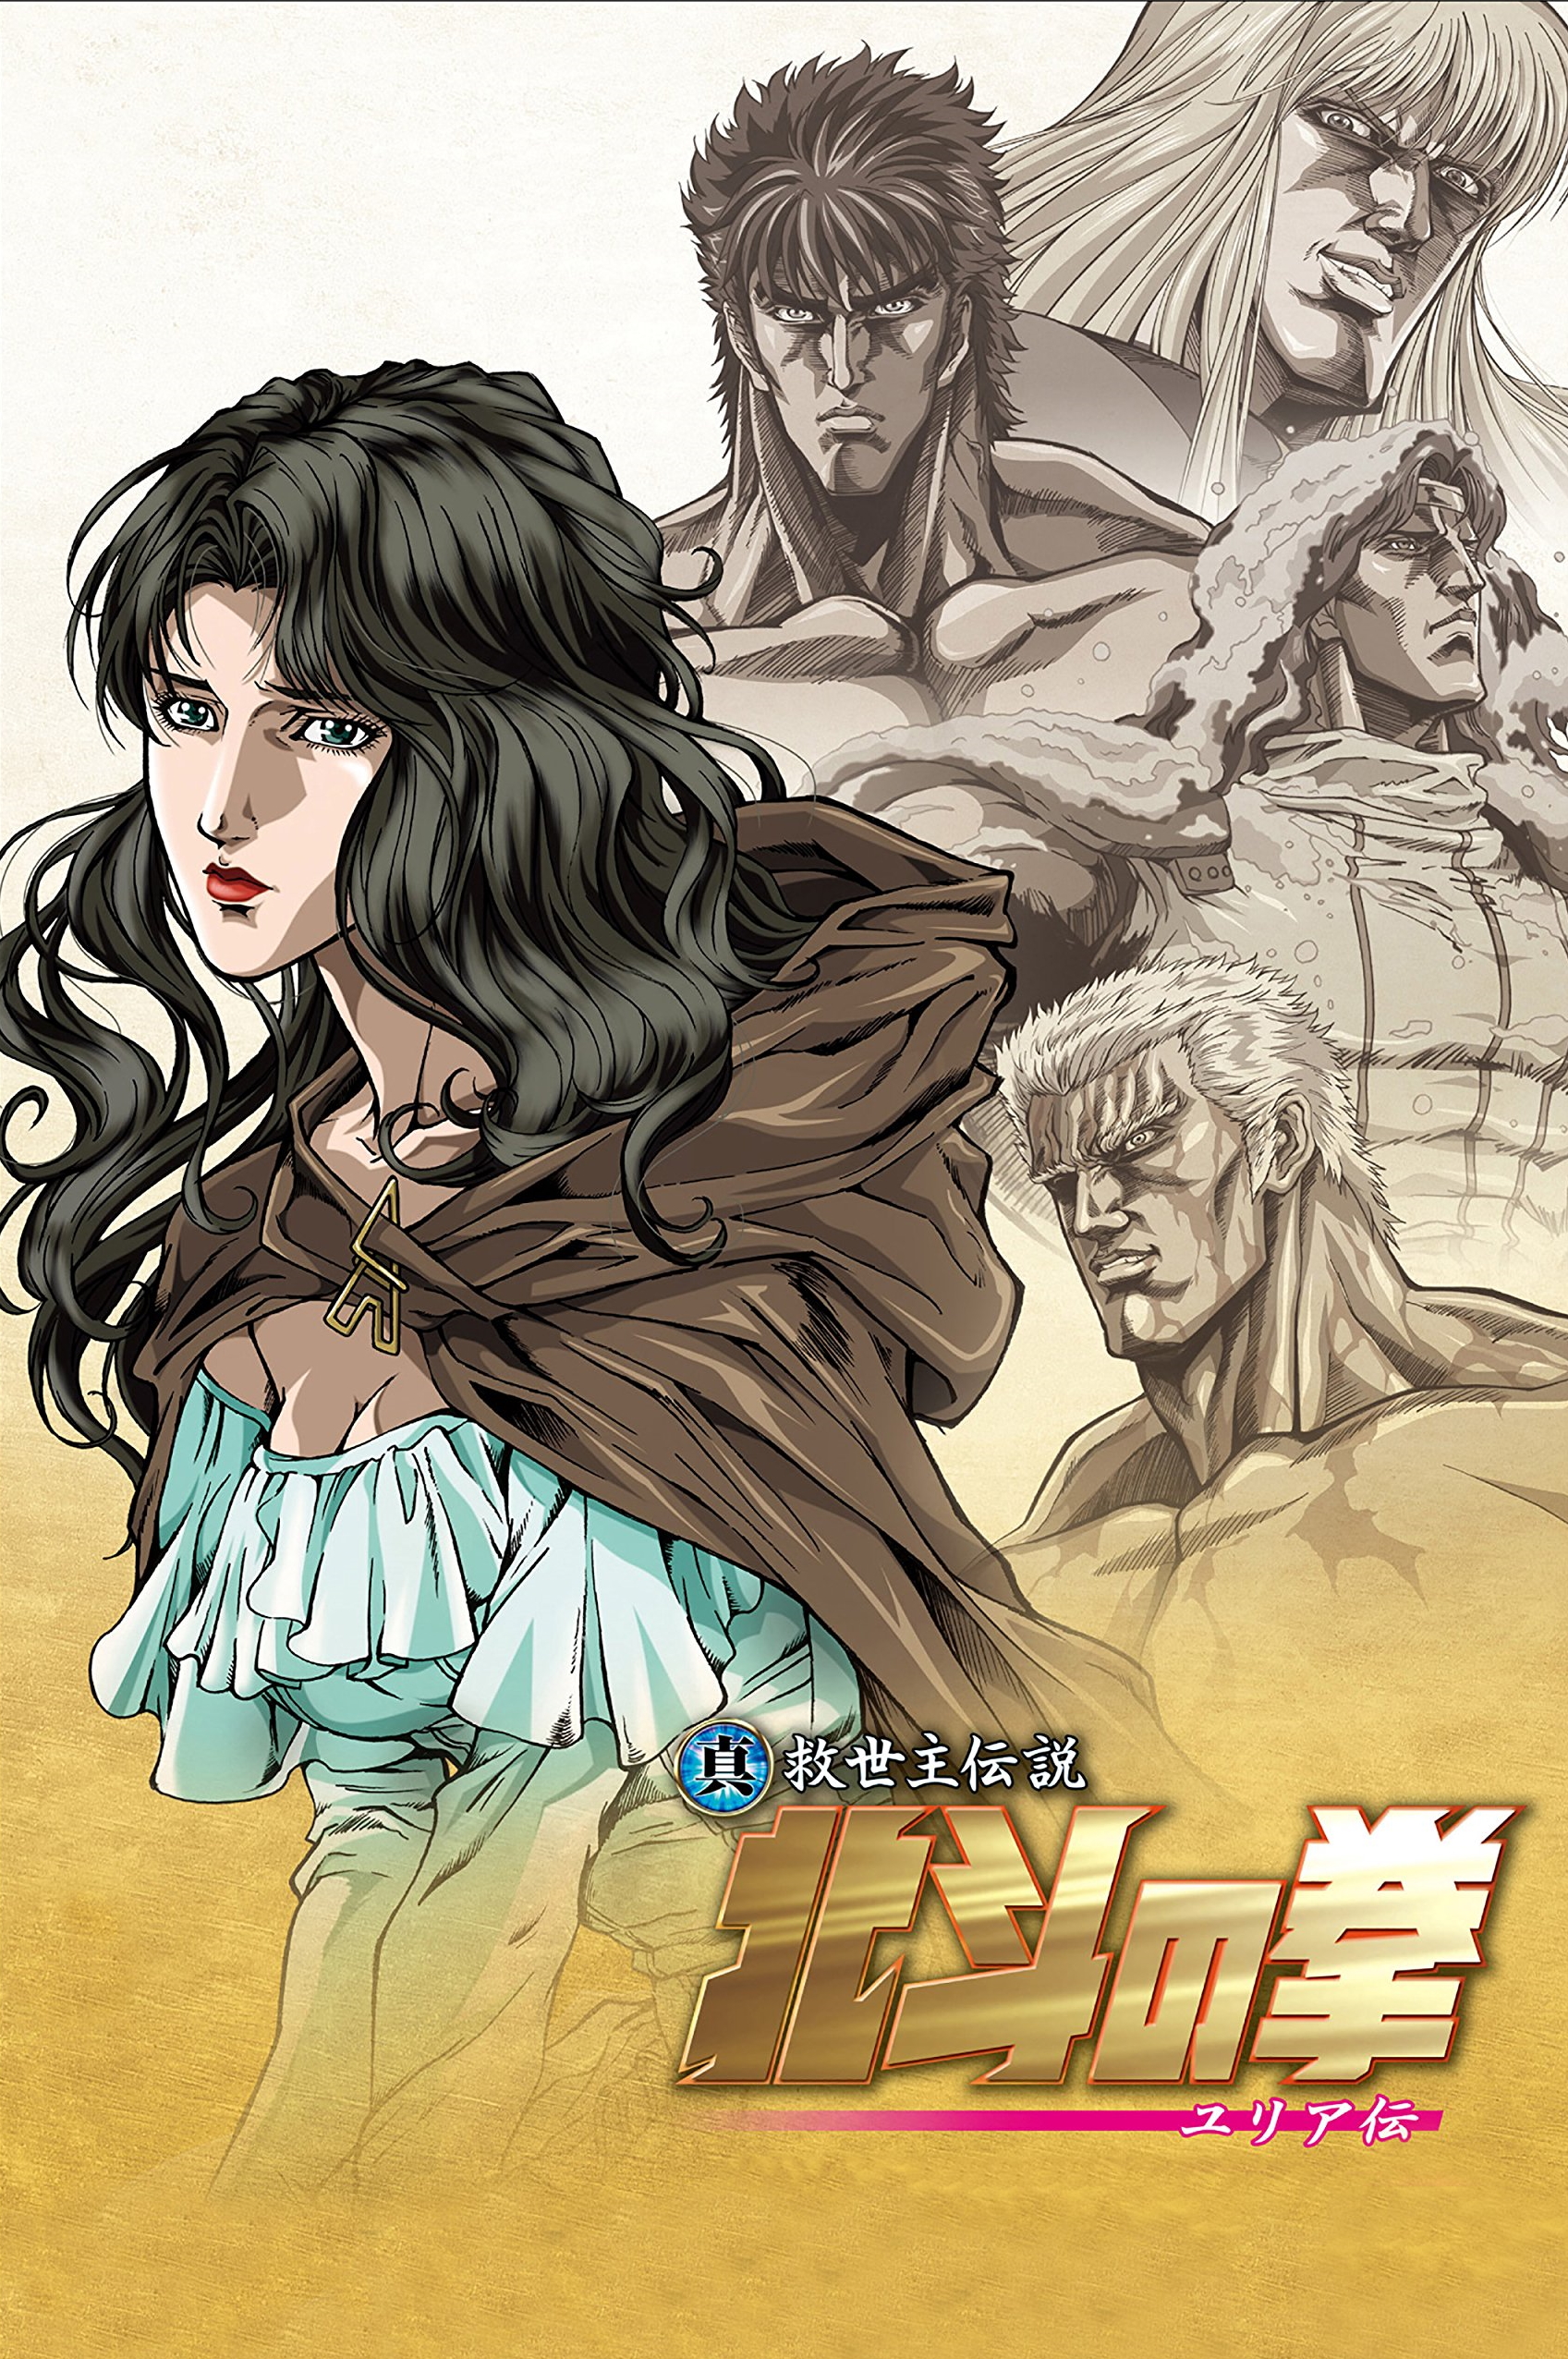 Fist of the North Star: The Legend of Yuria